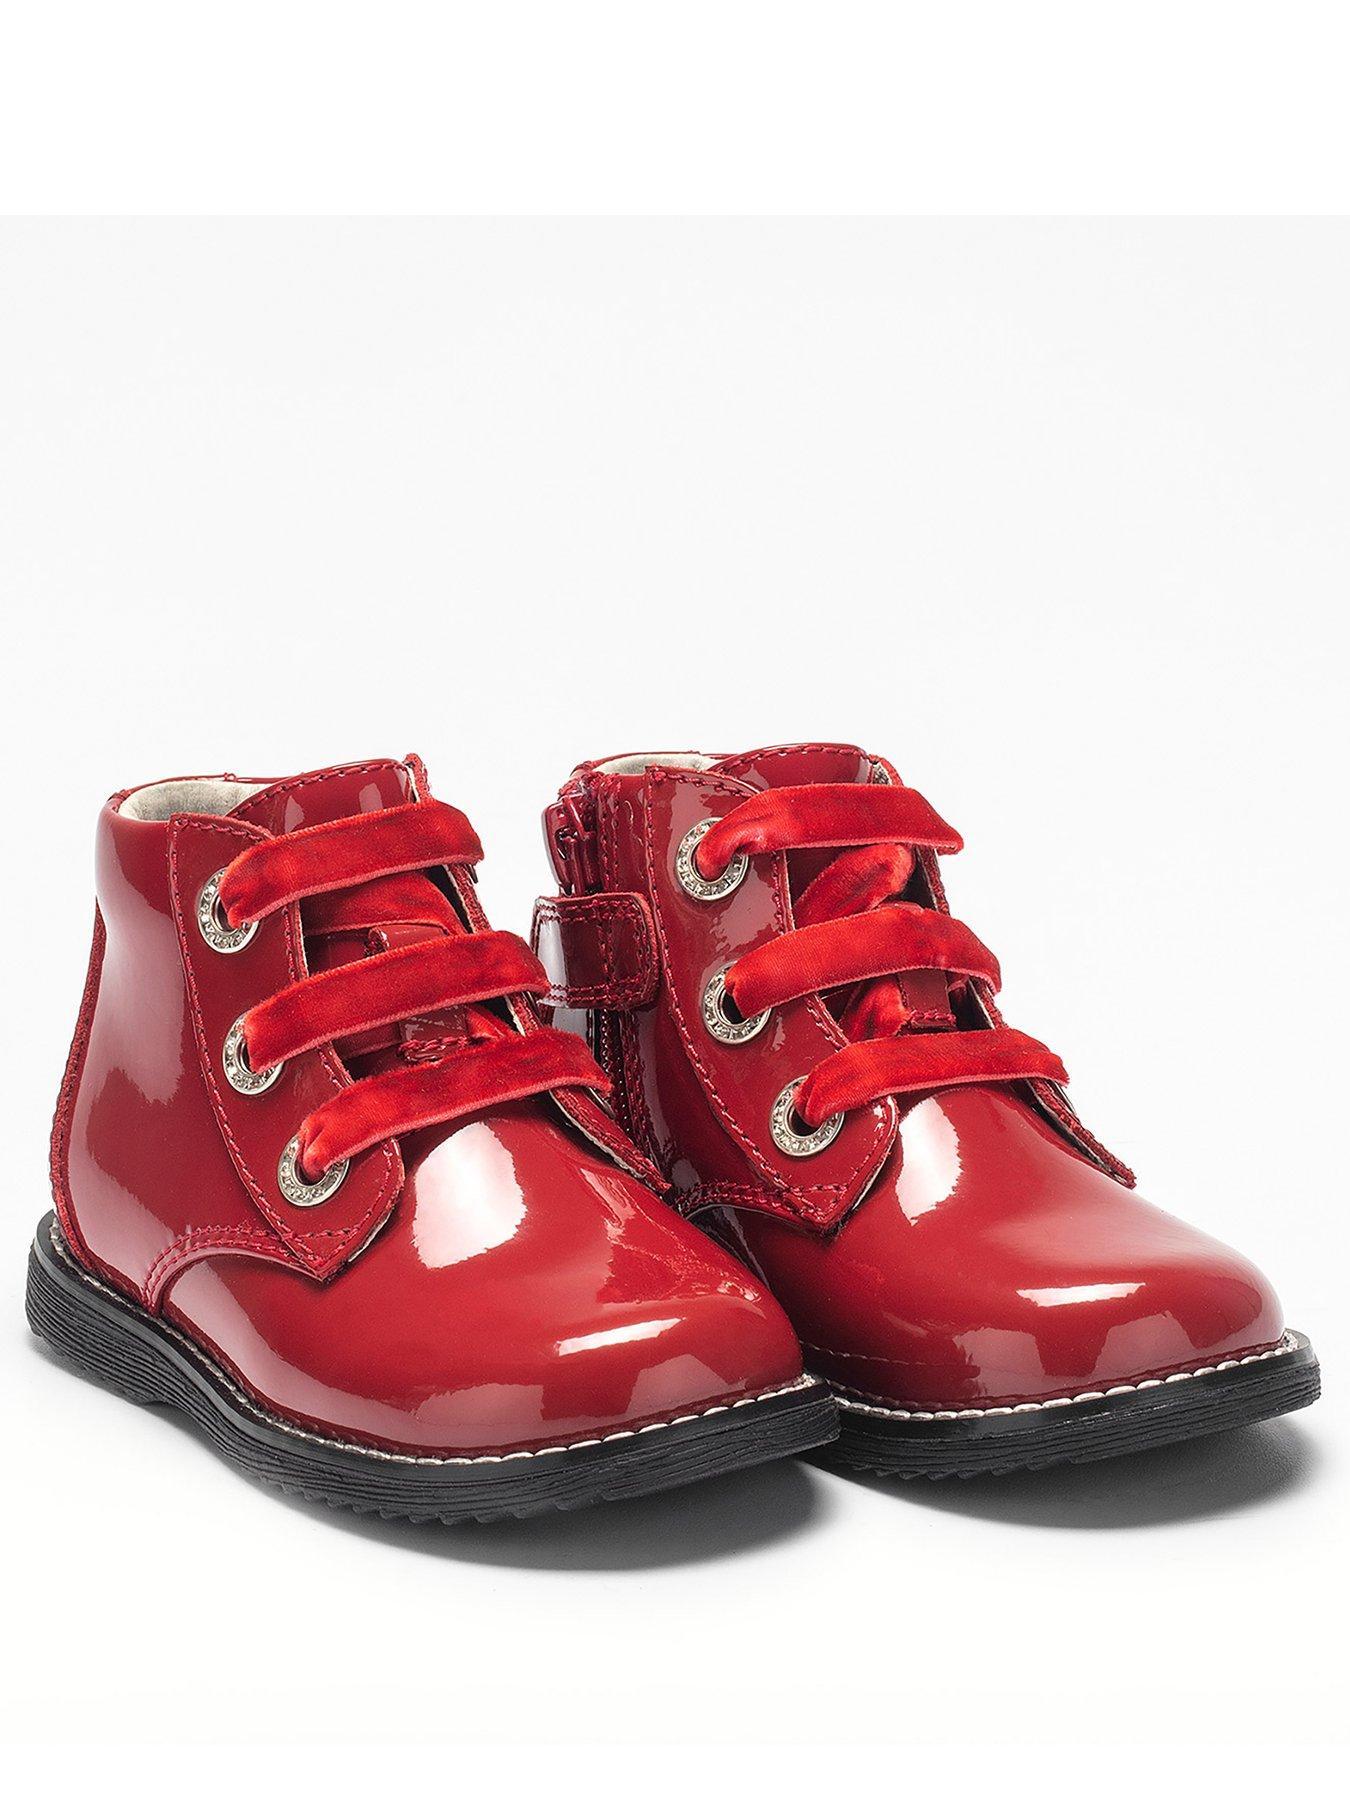 red patent boots uk